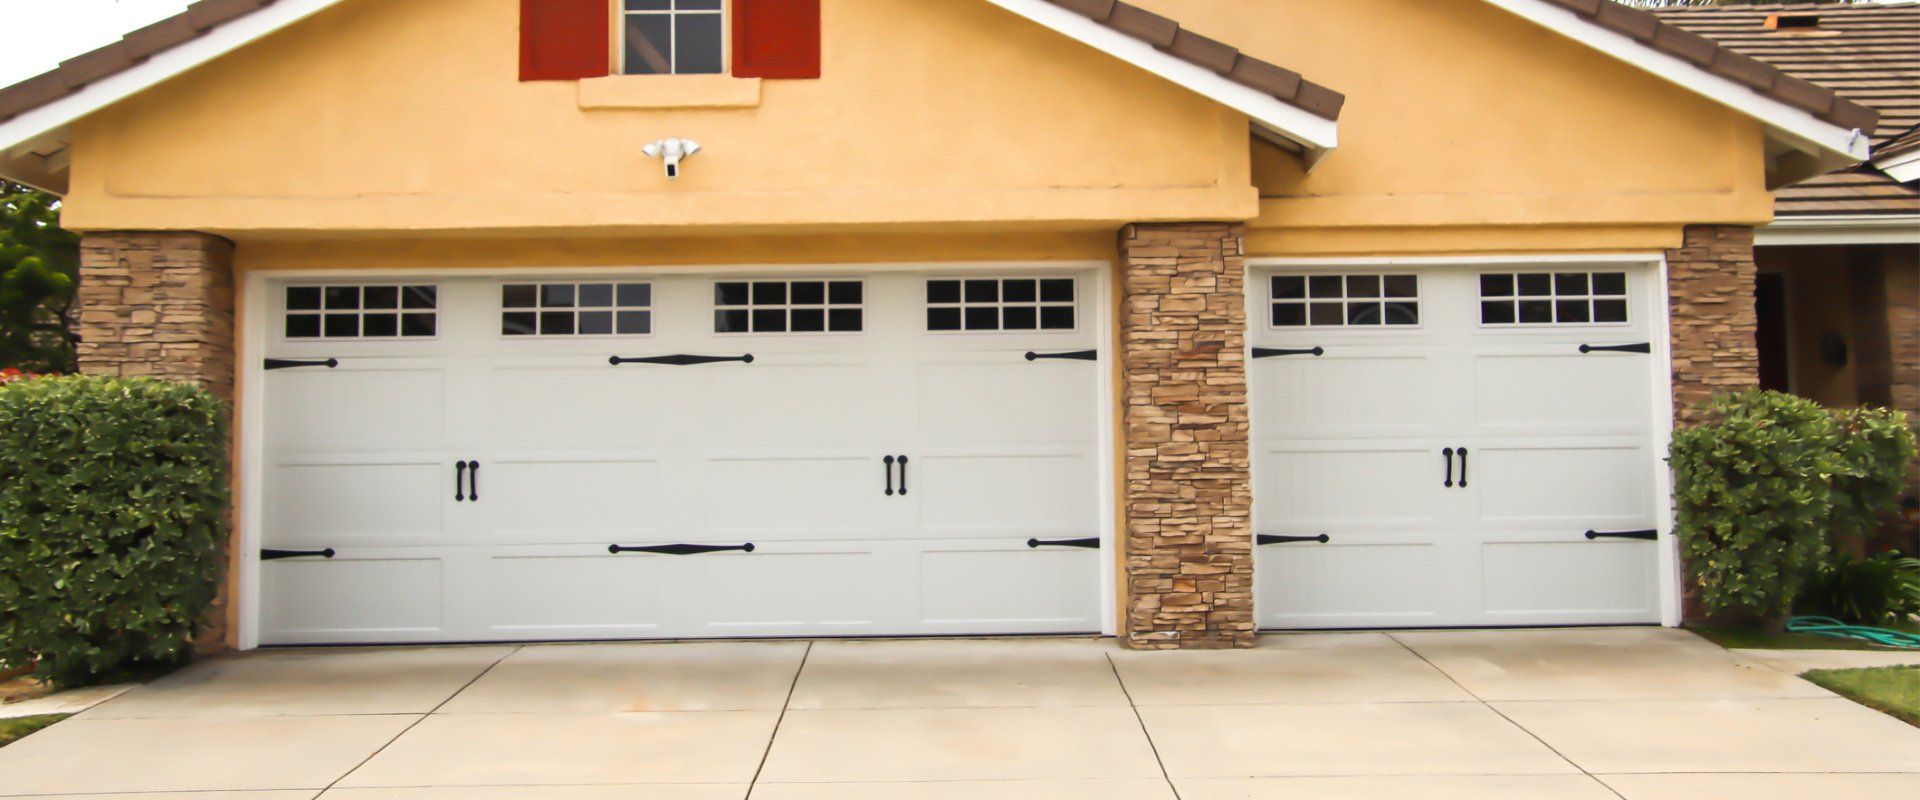 Home Exterior With Carriage Style Garage Doors — Everett, WA — Northwest Concrete & Landscape Specialty, LLC